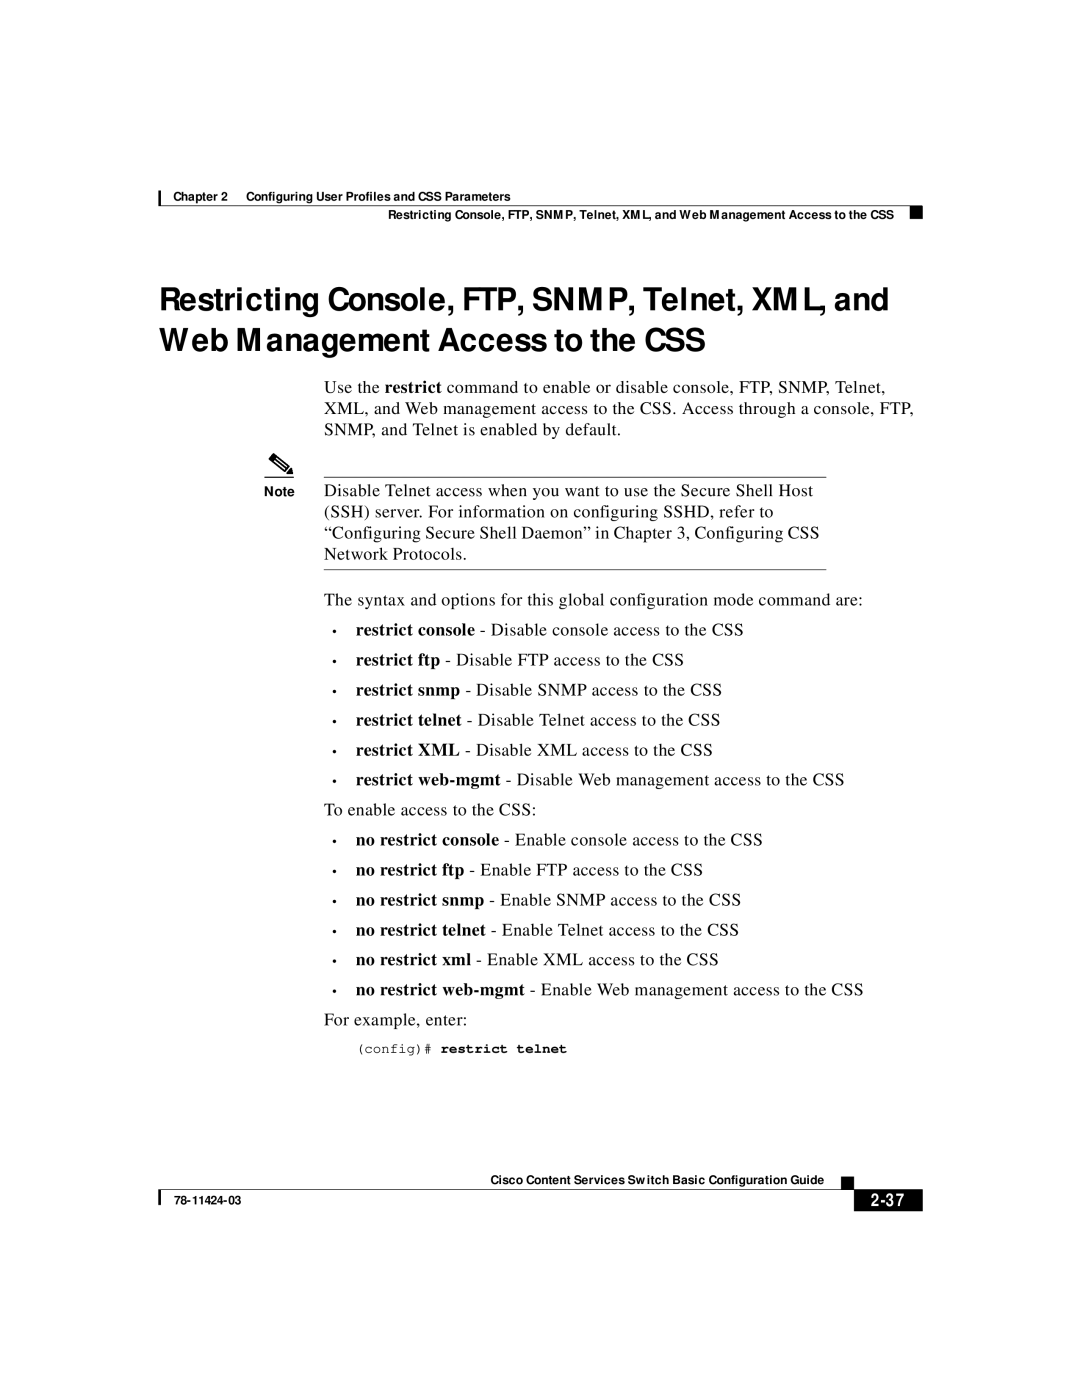 Cisco Systems 78-11424-03 manual 2-37, The syntax and options for this global configuration mode command are 